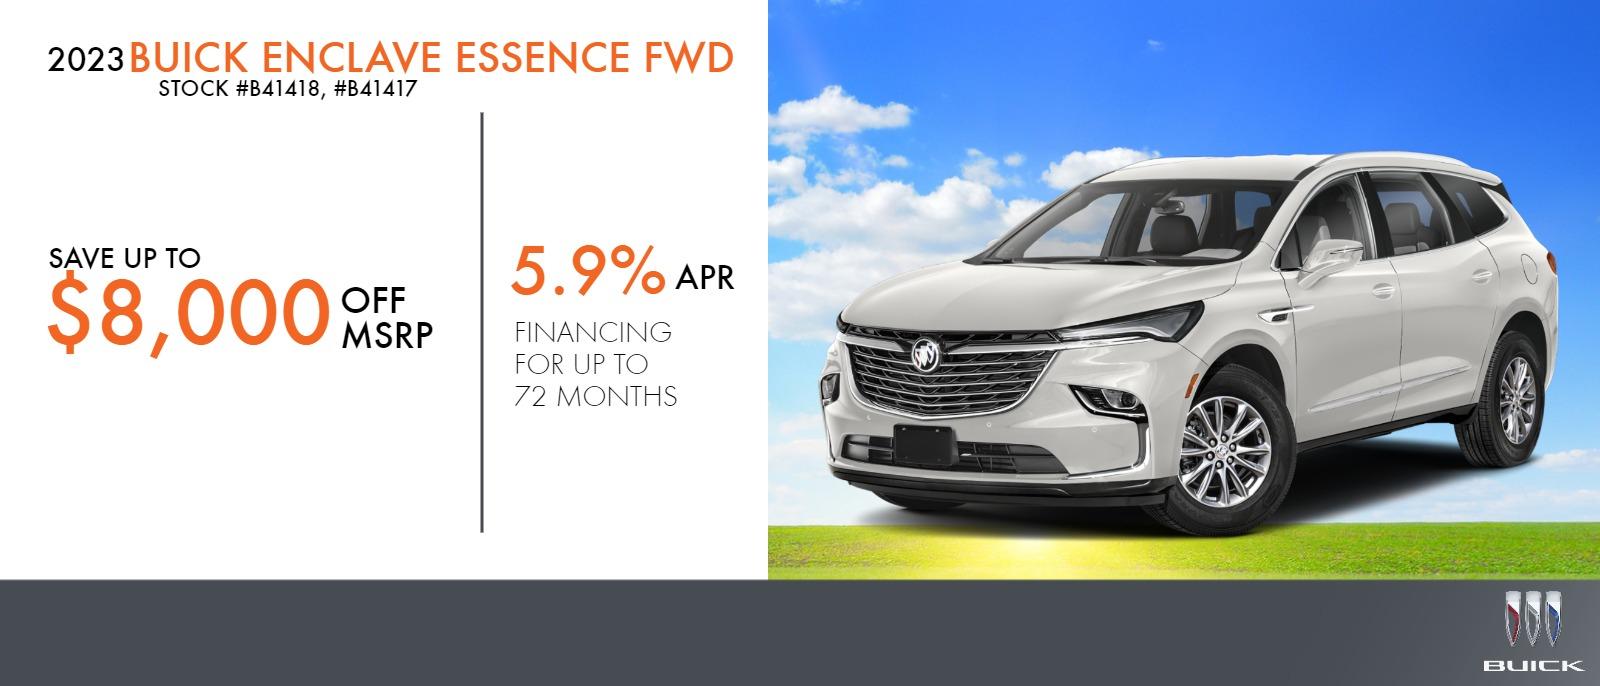 2023 BUICK ENCLAVE ESSENCE FWD
SAVE UP TO $8000 OFF MSRP
5.9% APR FINANCING FOR UP TO 72 MONTHS